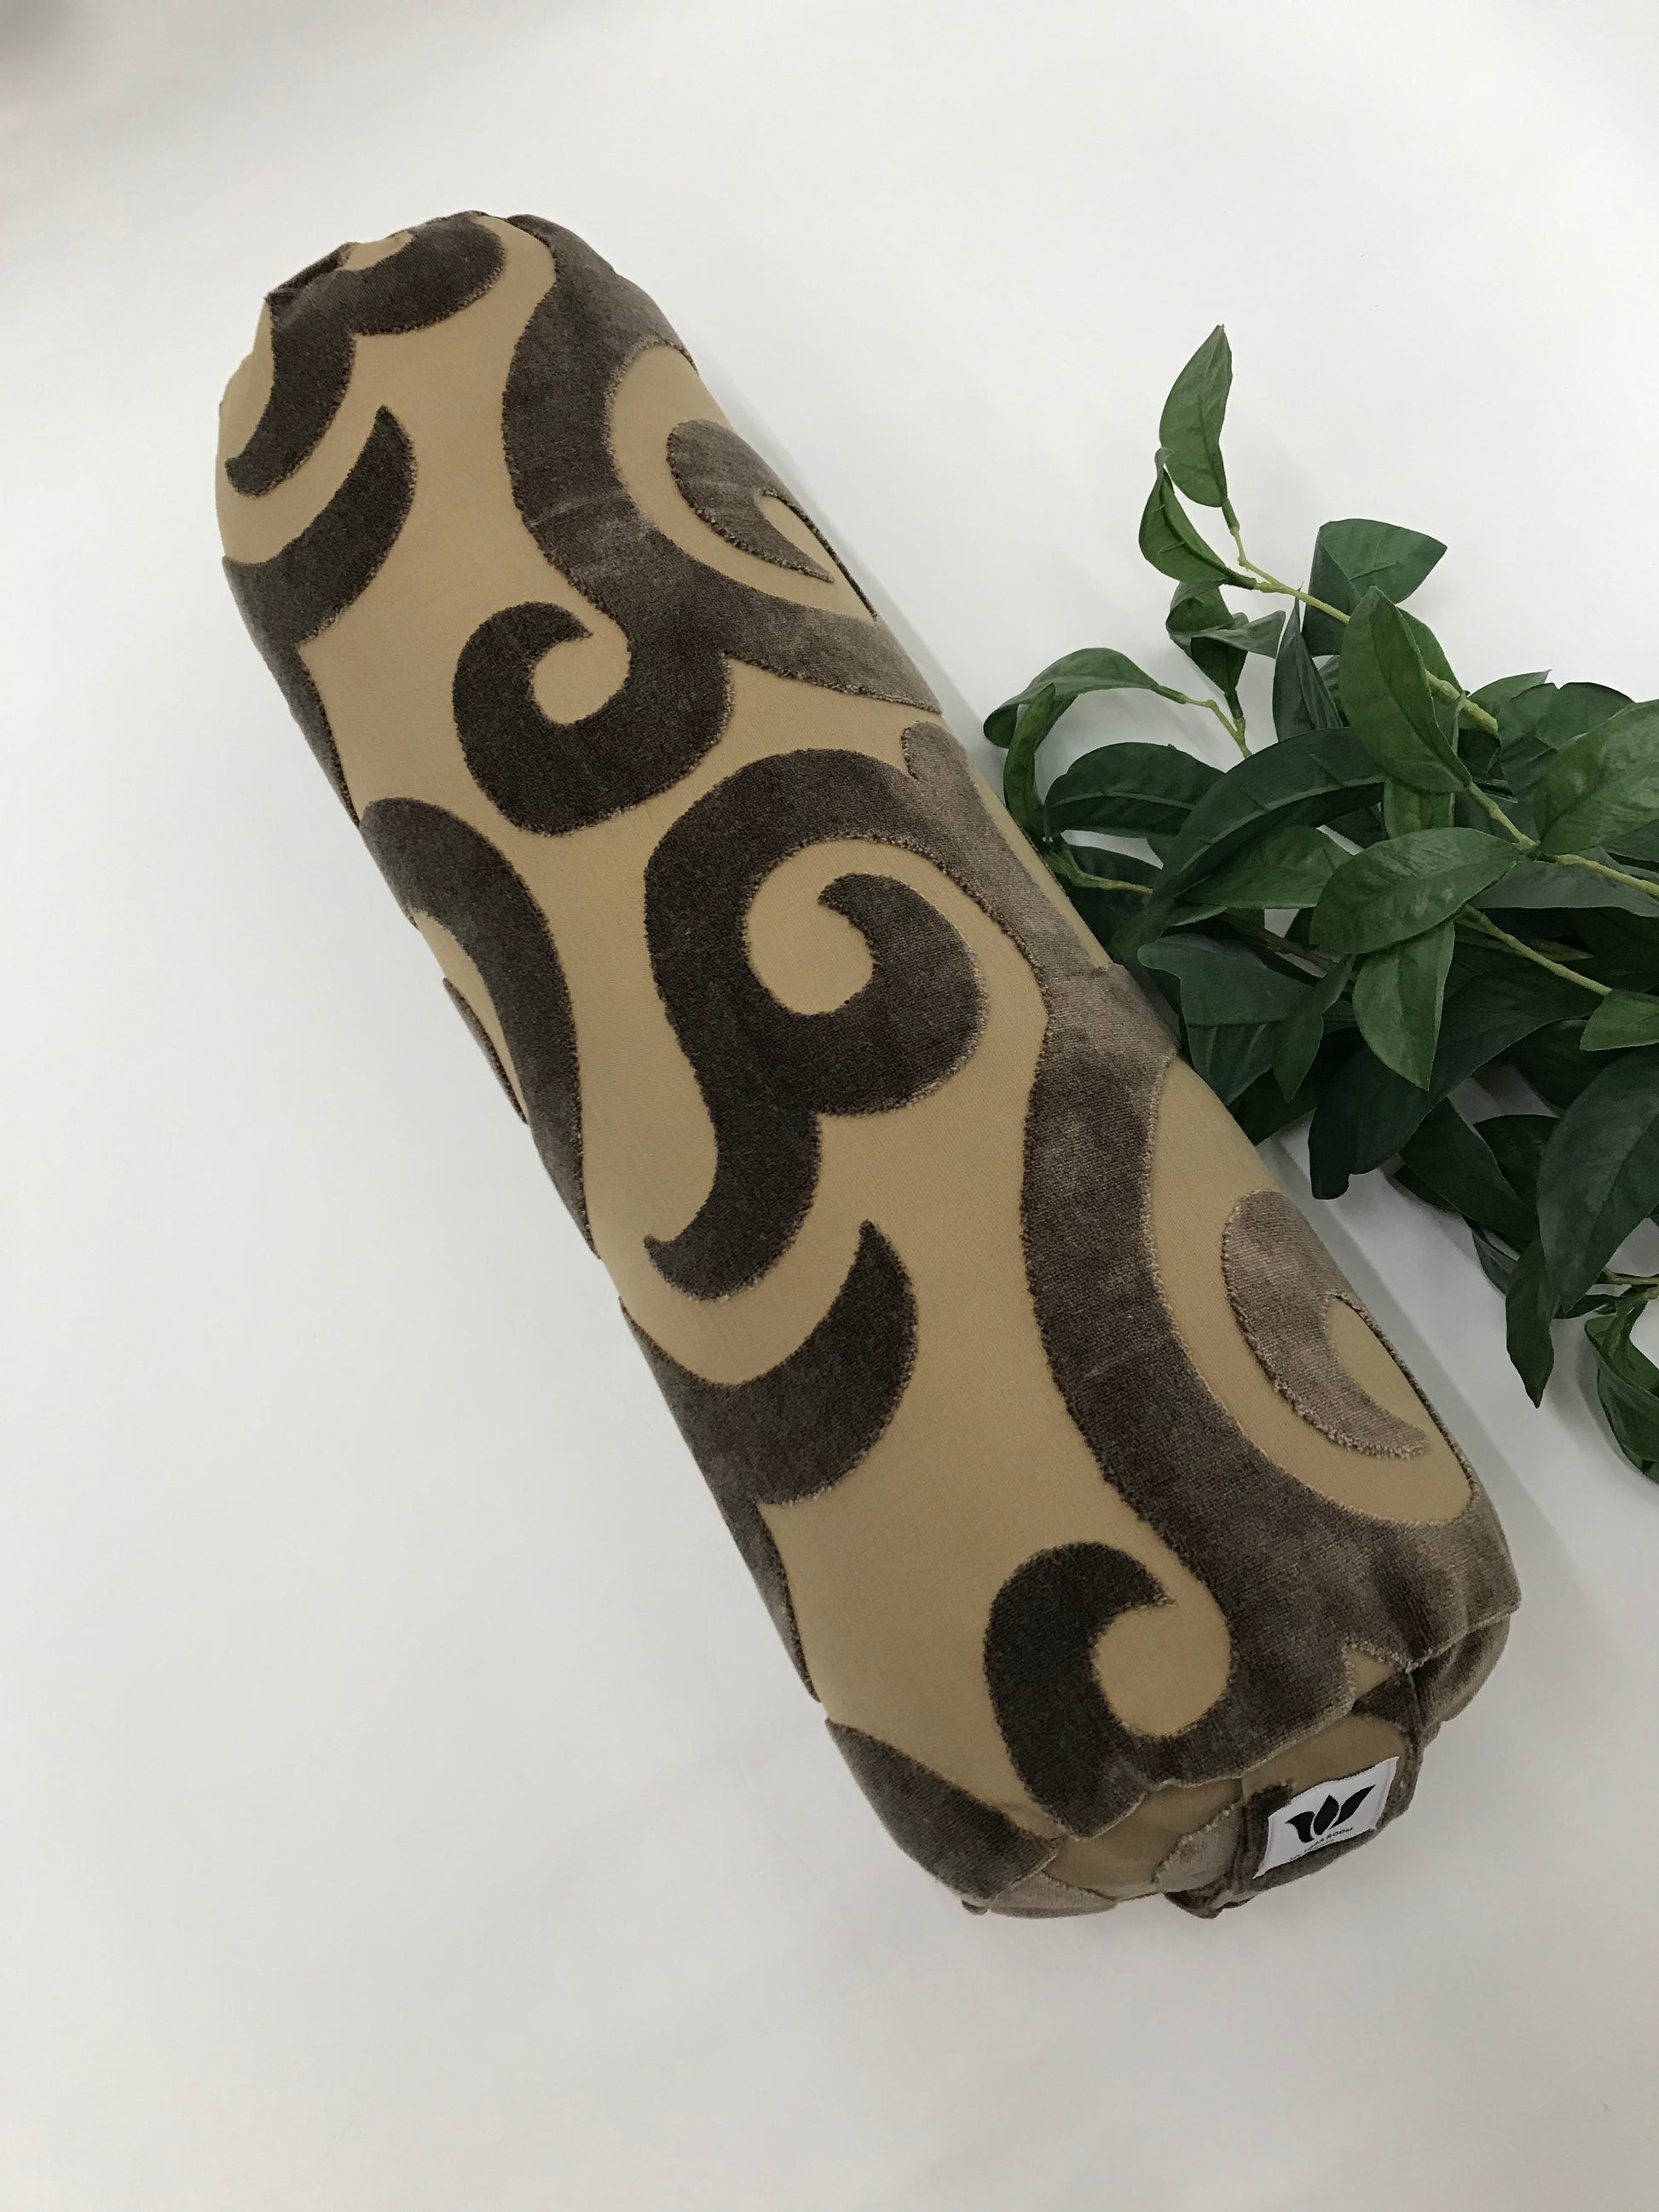 Round yoga bolster in plush brown cotton and linen swirl print fabric . Allergy conscious fill with removeable cover. Made in Canada by My Yoga Room Elements